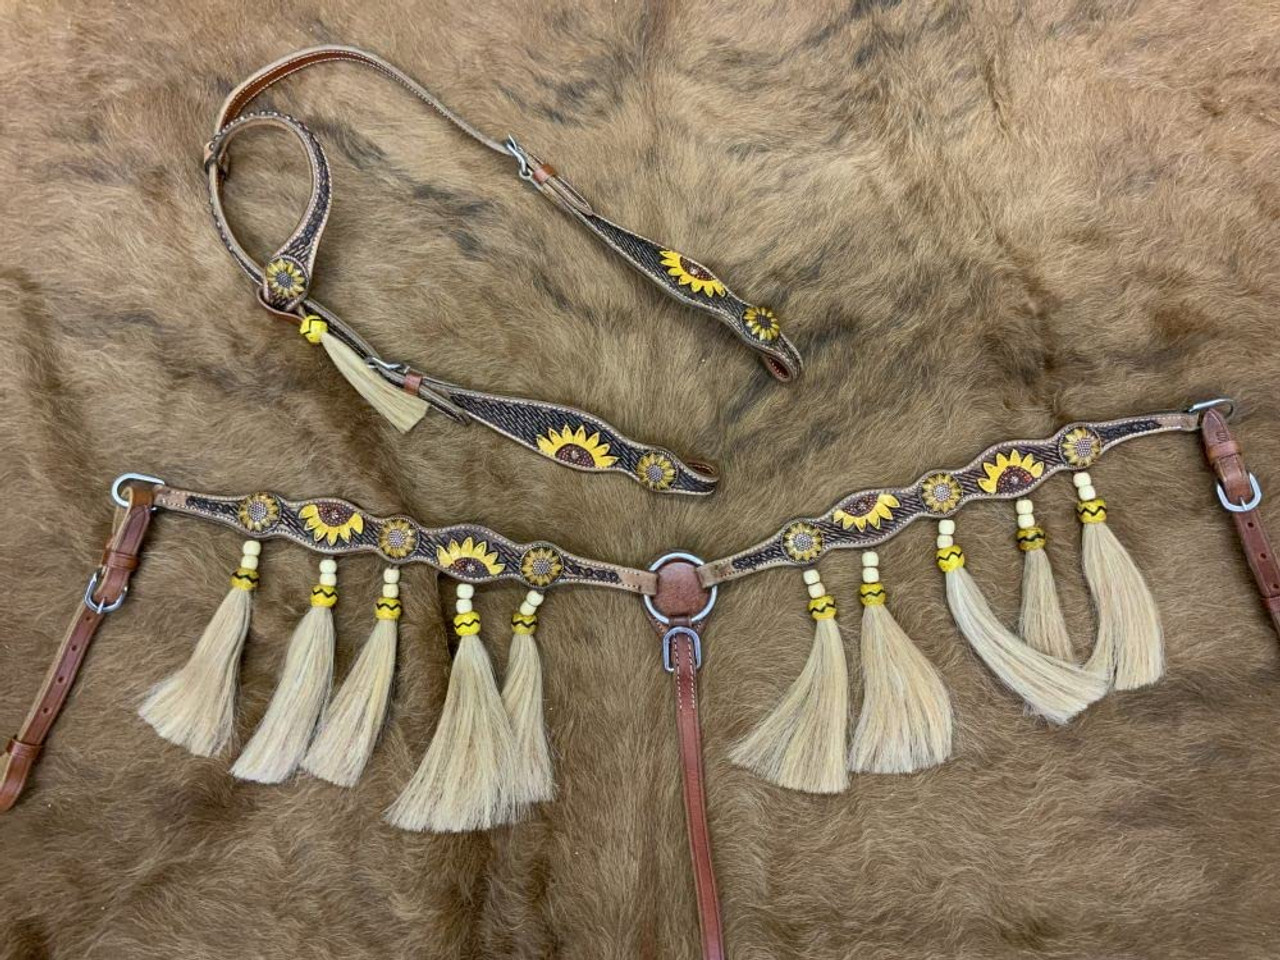 Pony Size Sunflower Print Headstall and Breast Collar Set